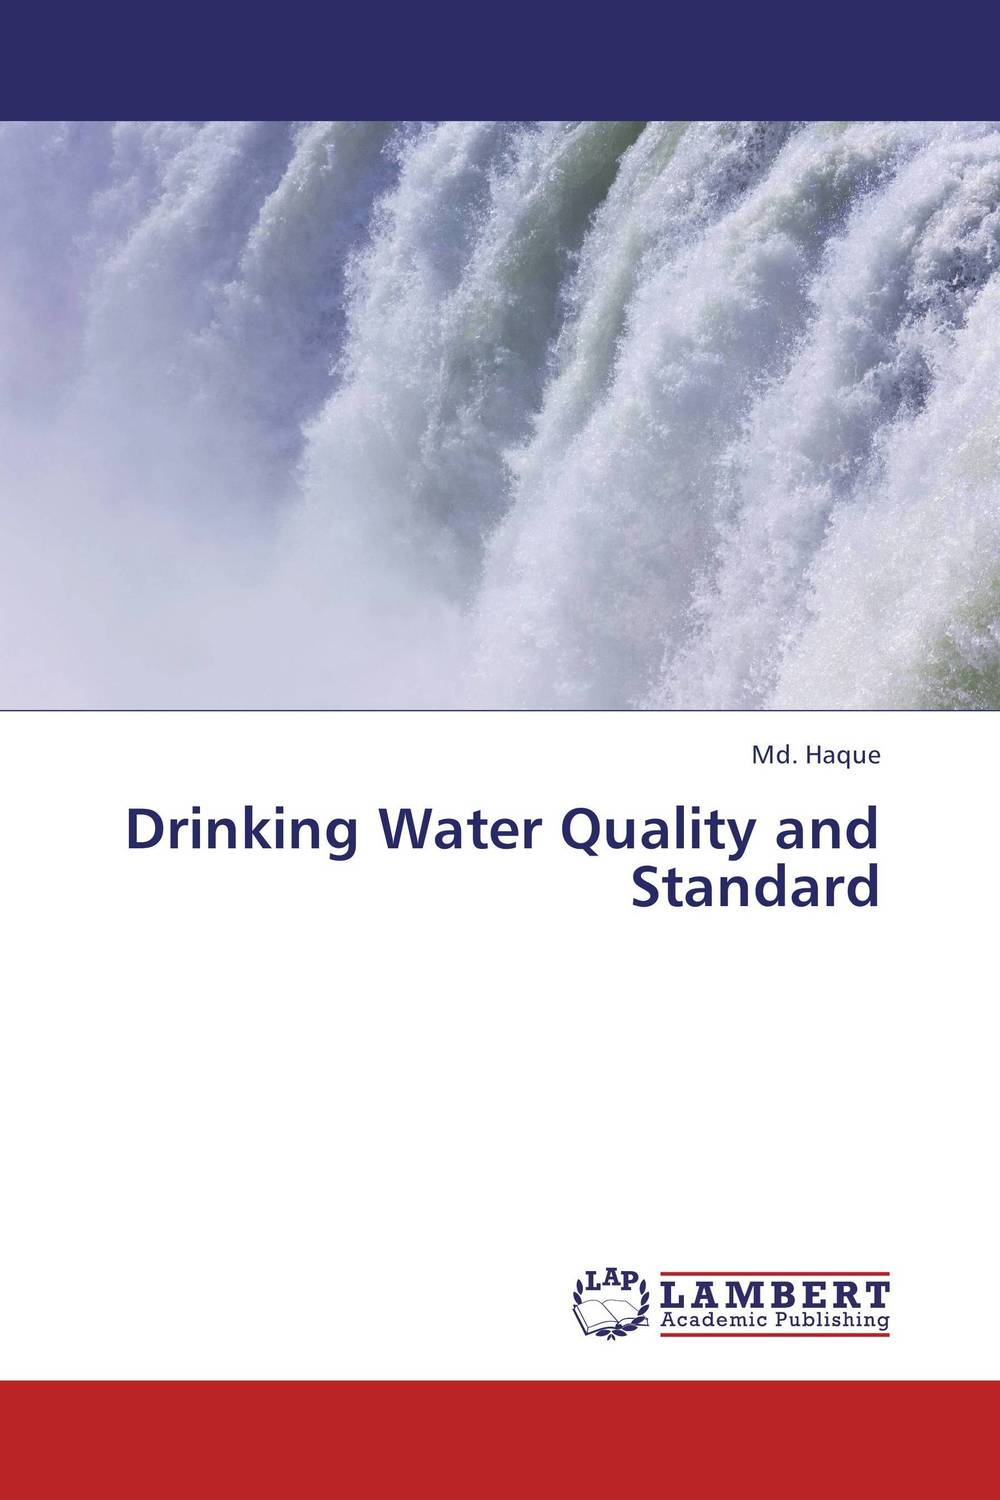 Drinking Water Quality and Standard